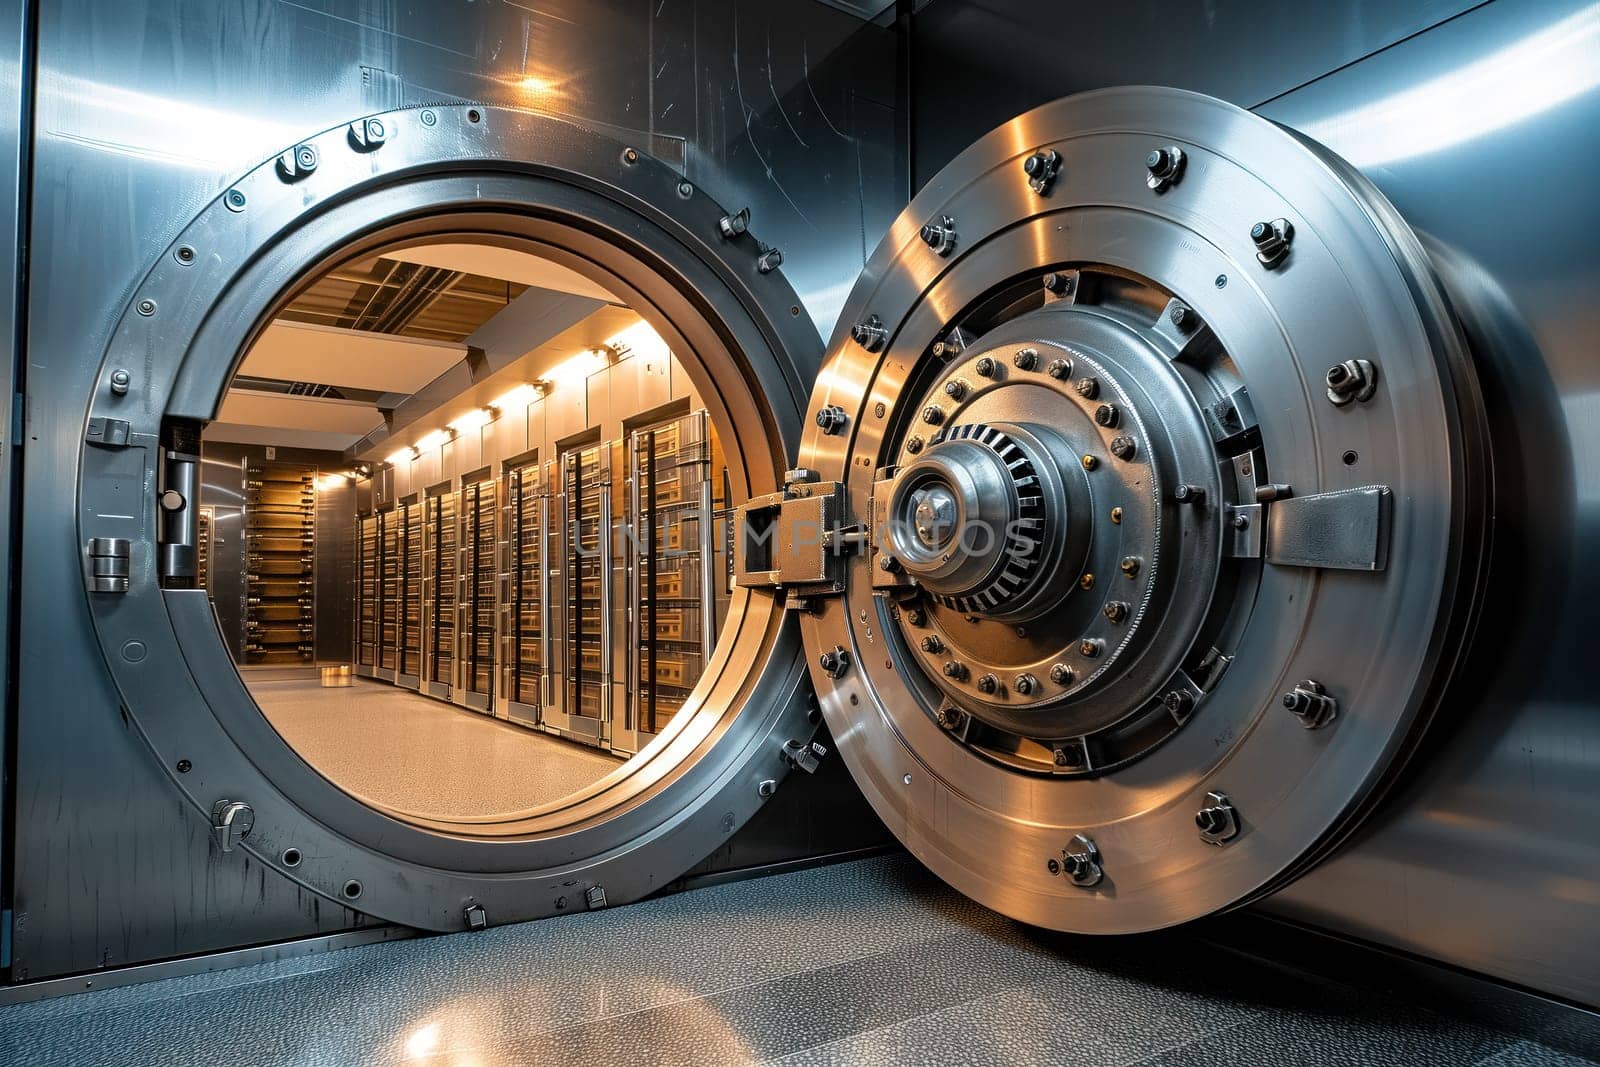 Open bank vault door, revealing a room filled with safety deposit boxes in safe depositary. The metallic and sturdy design of the door highlights security and protection